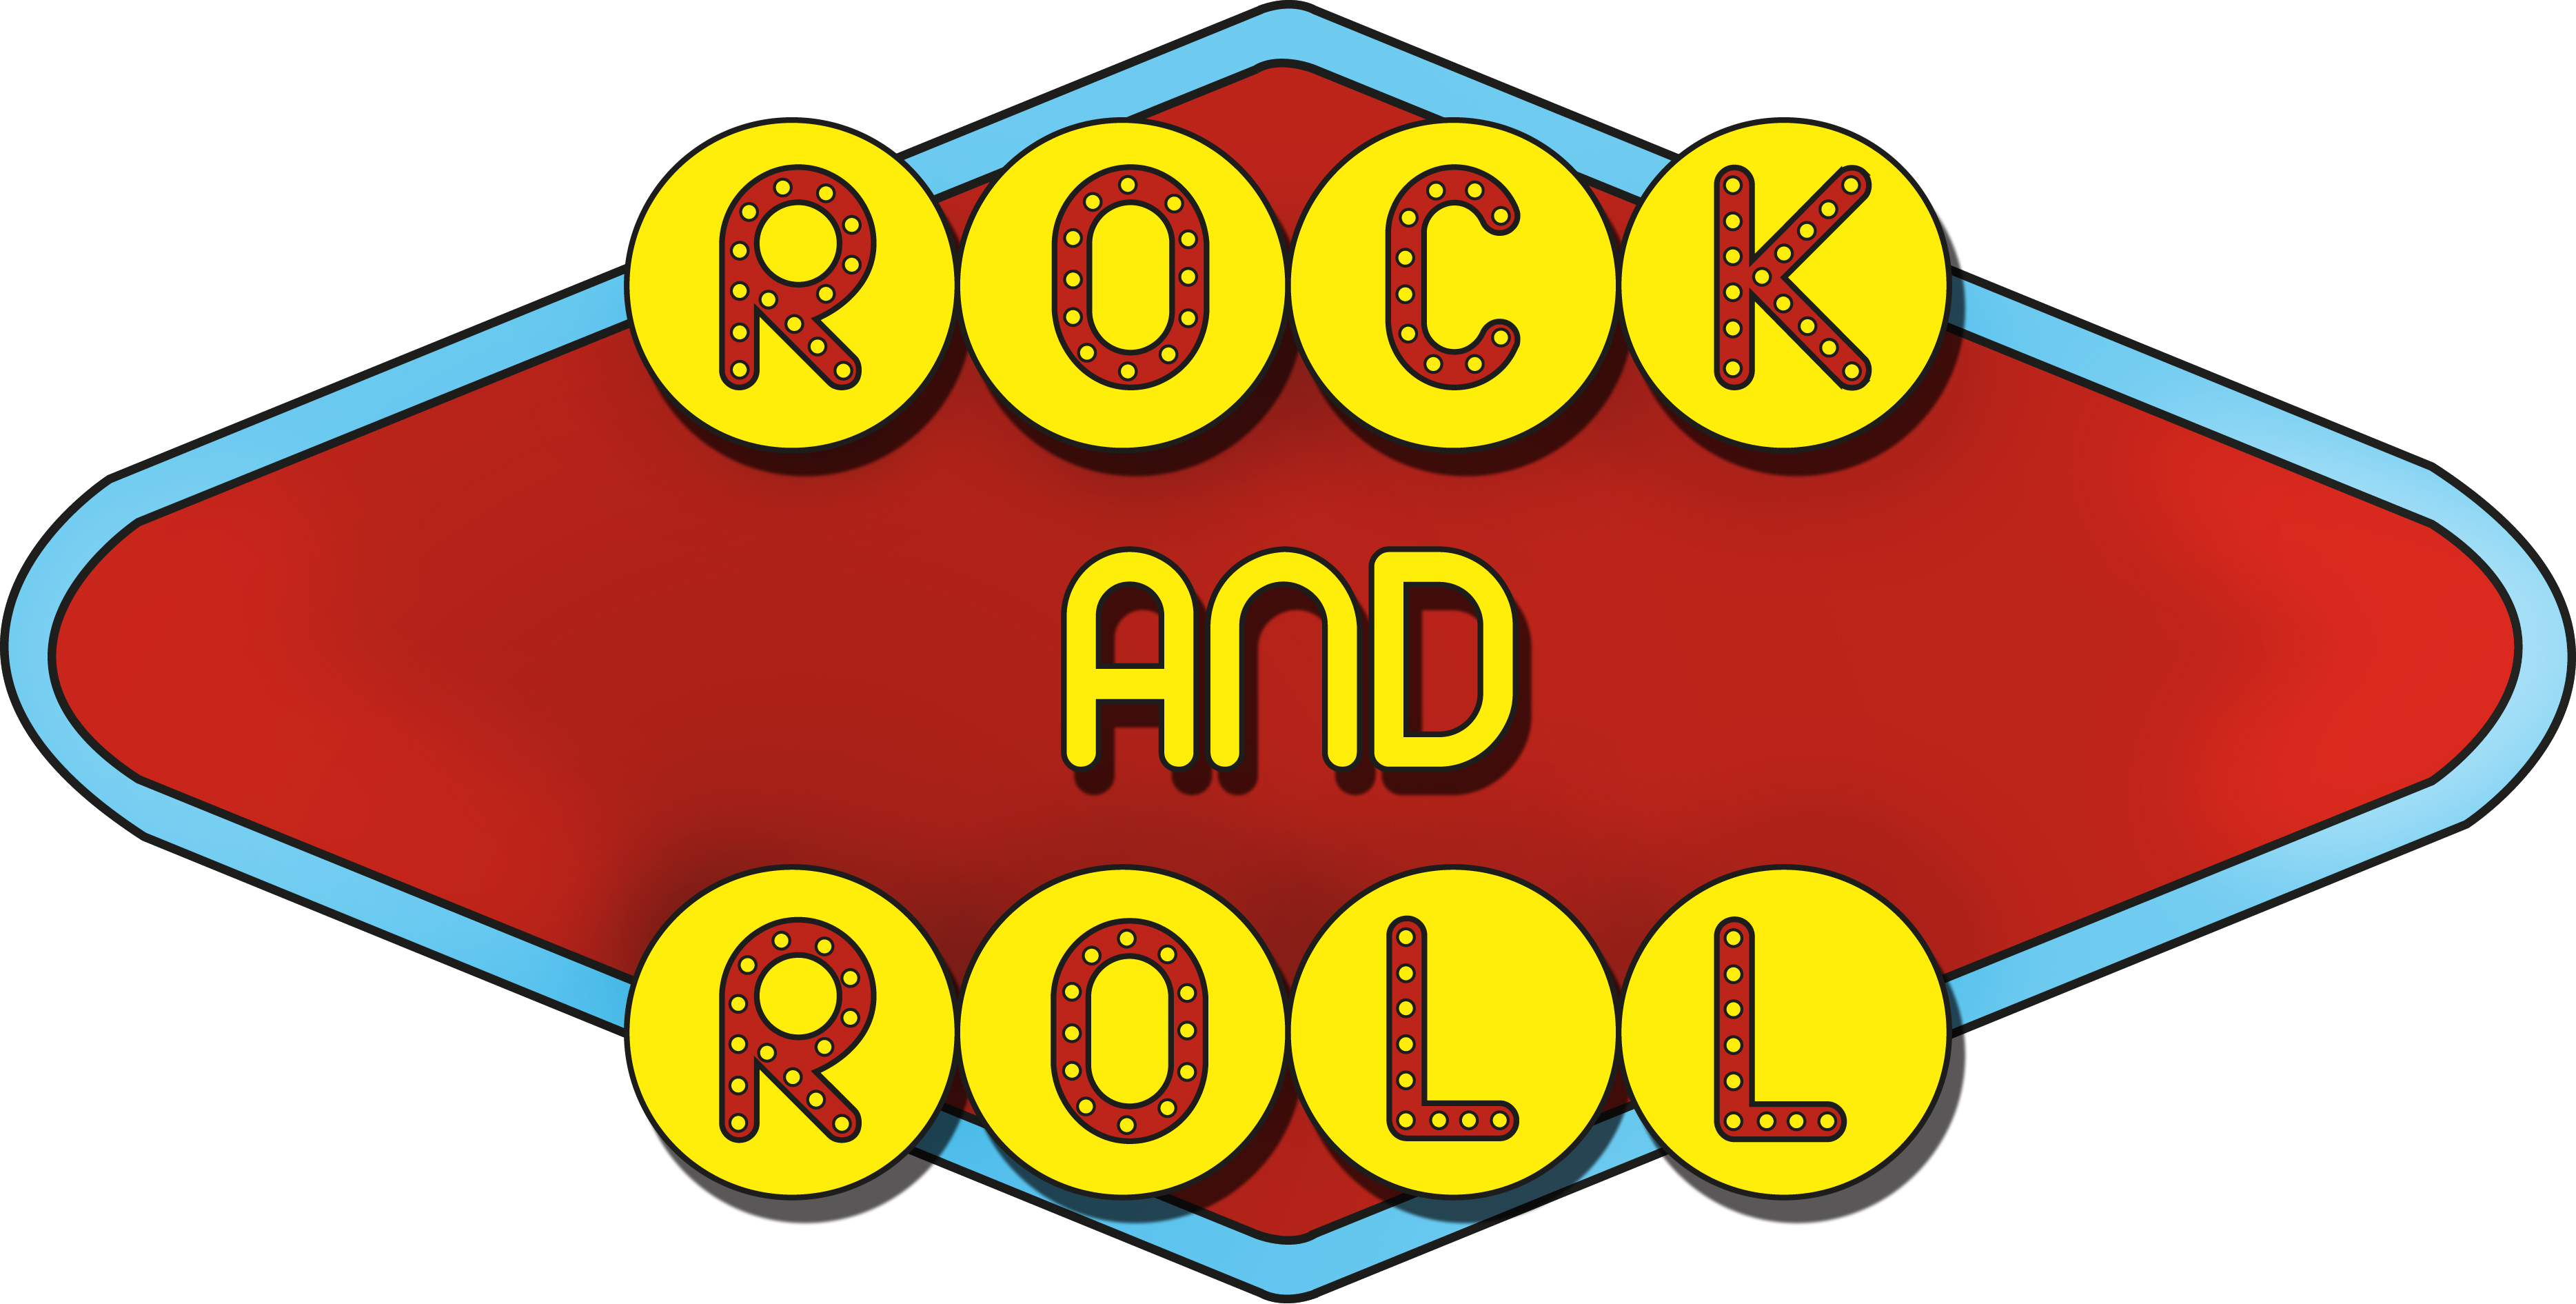 Rock And Roll Logo By Ryanboy On Deviantart